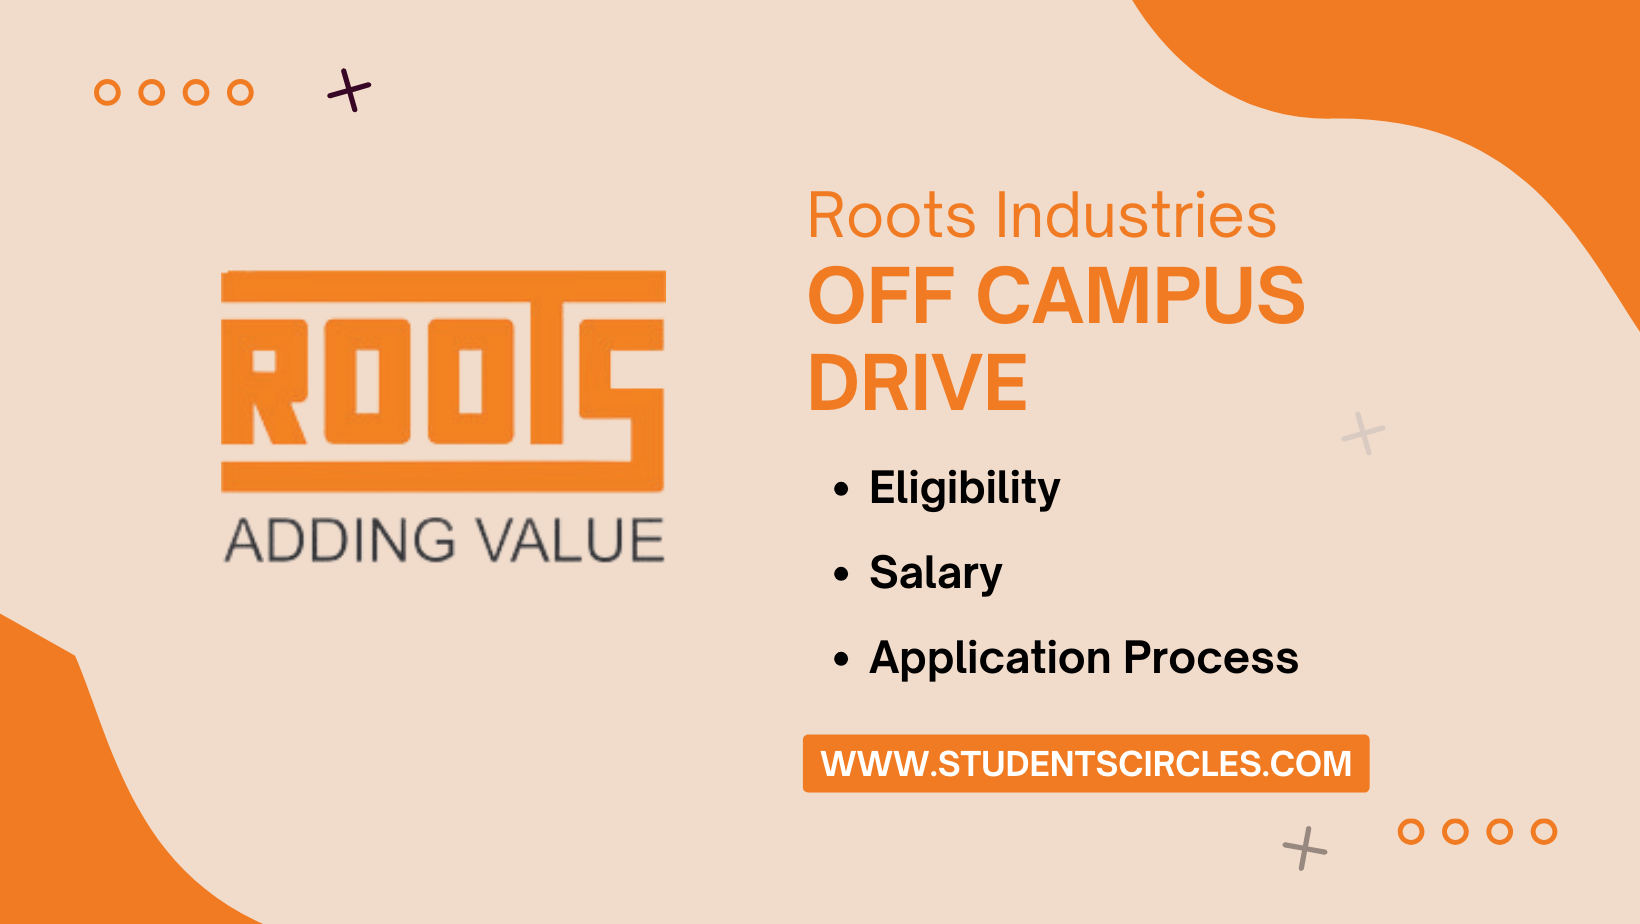 Roots Industries Off Campus Drive